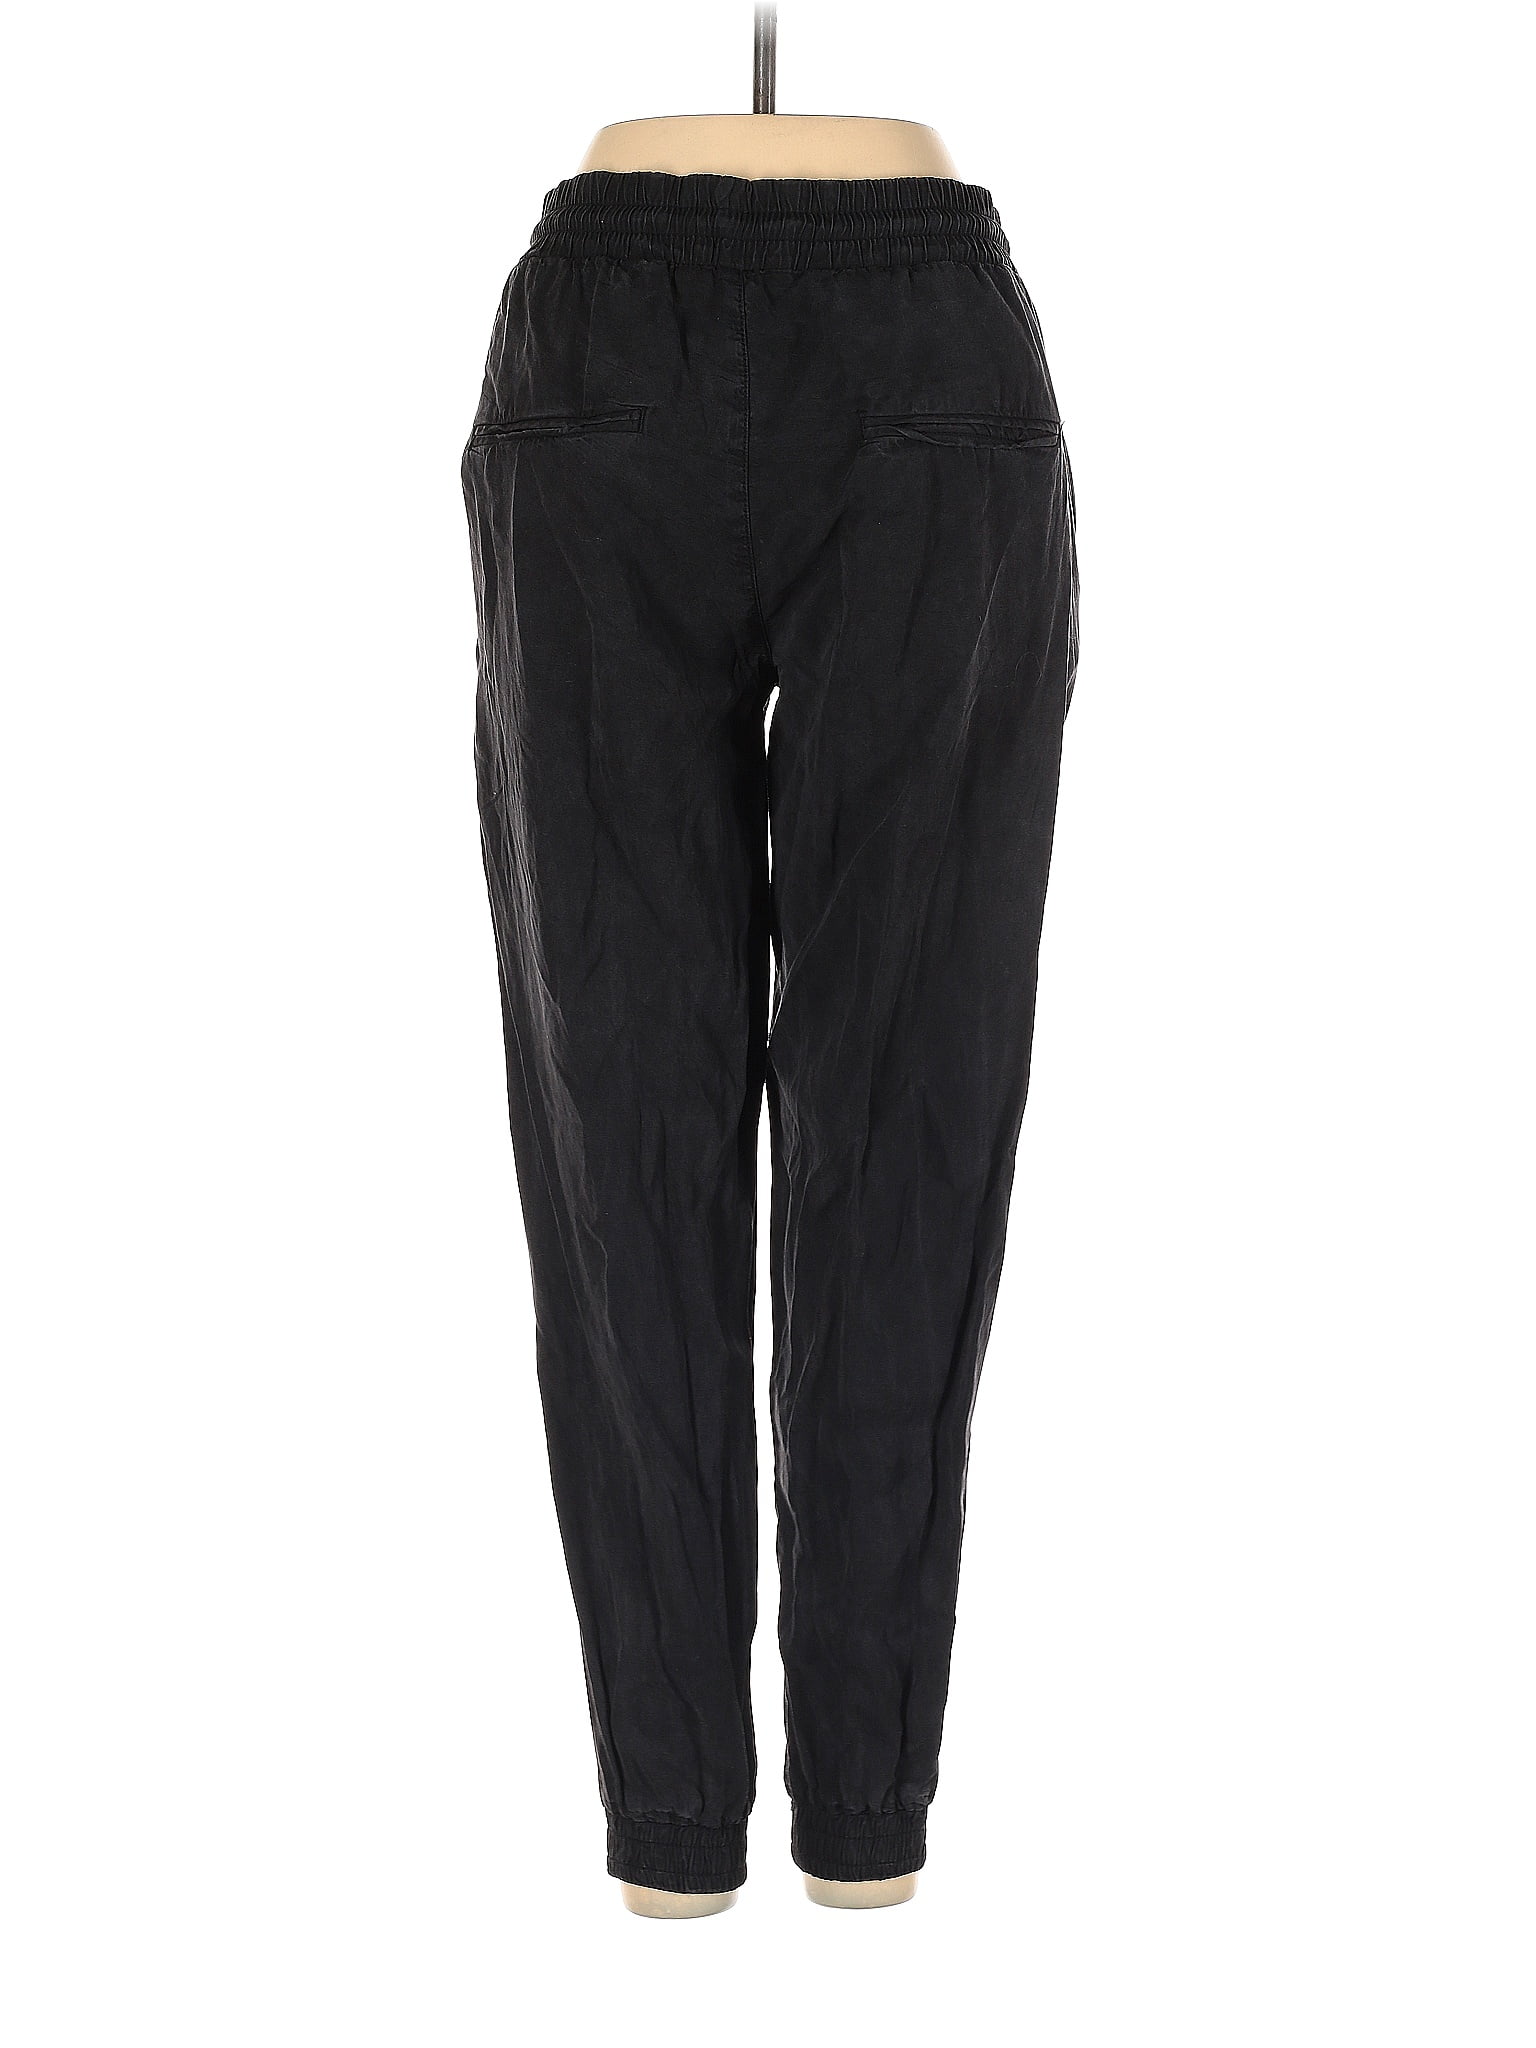 Zara 100% Lyocell Solid Black Casual Pants Size XS - 53% off